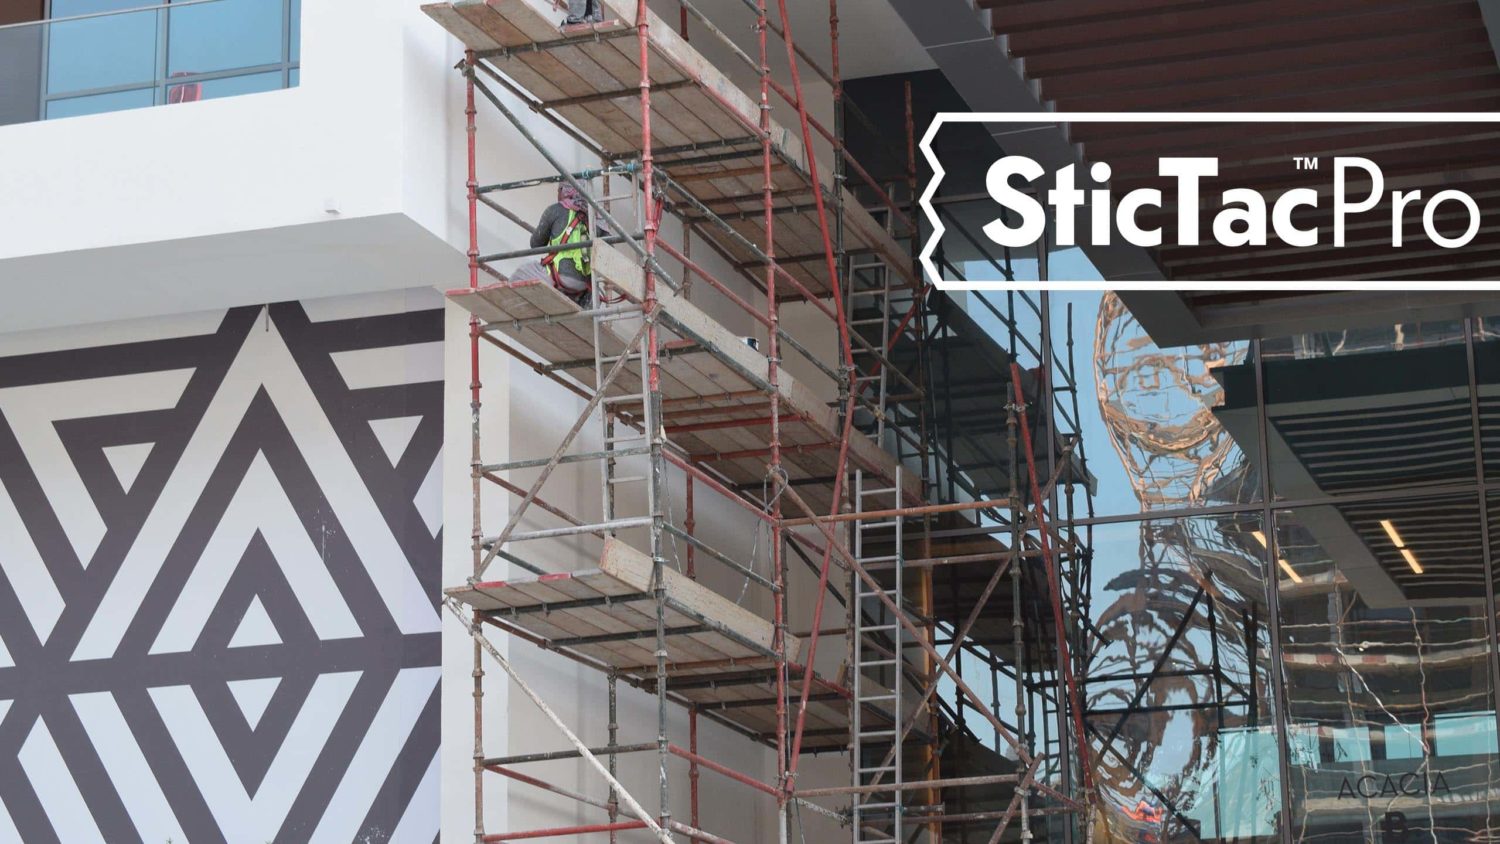 Photo of construction site with SticTac Pro logo